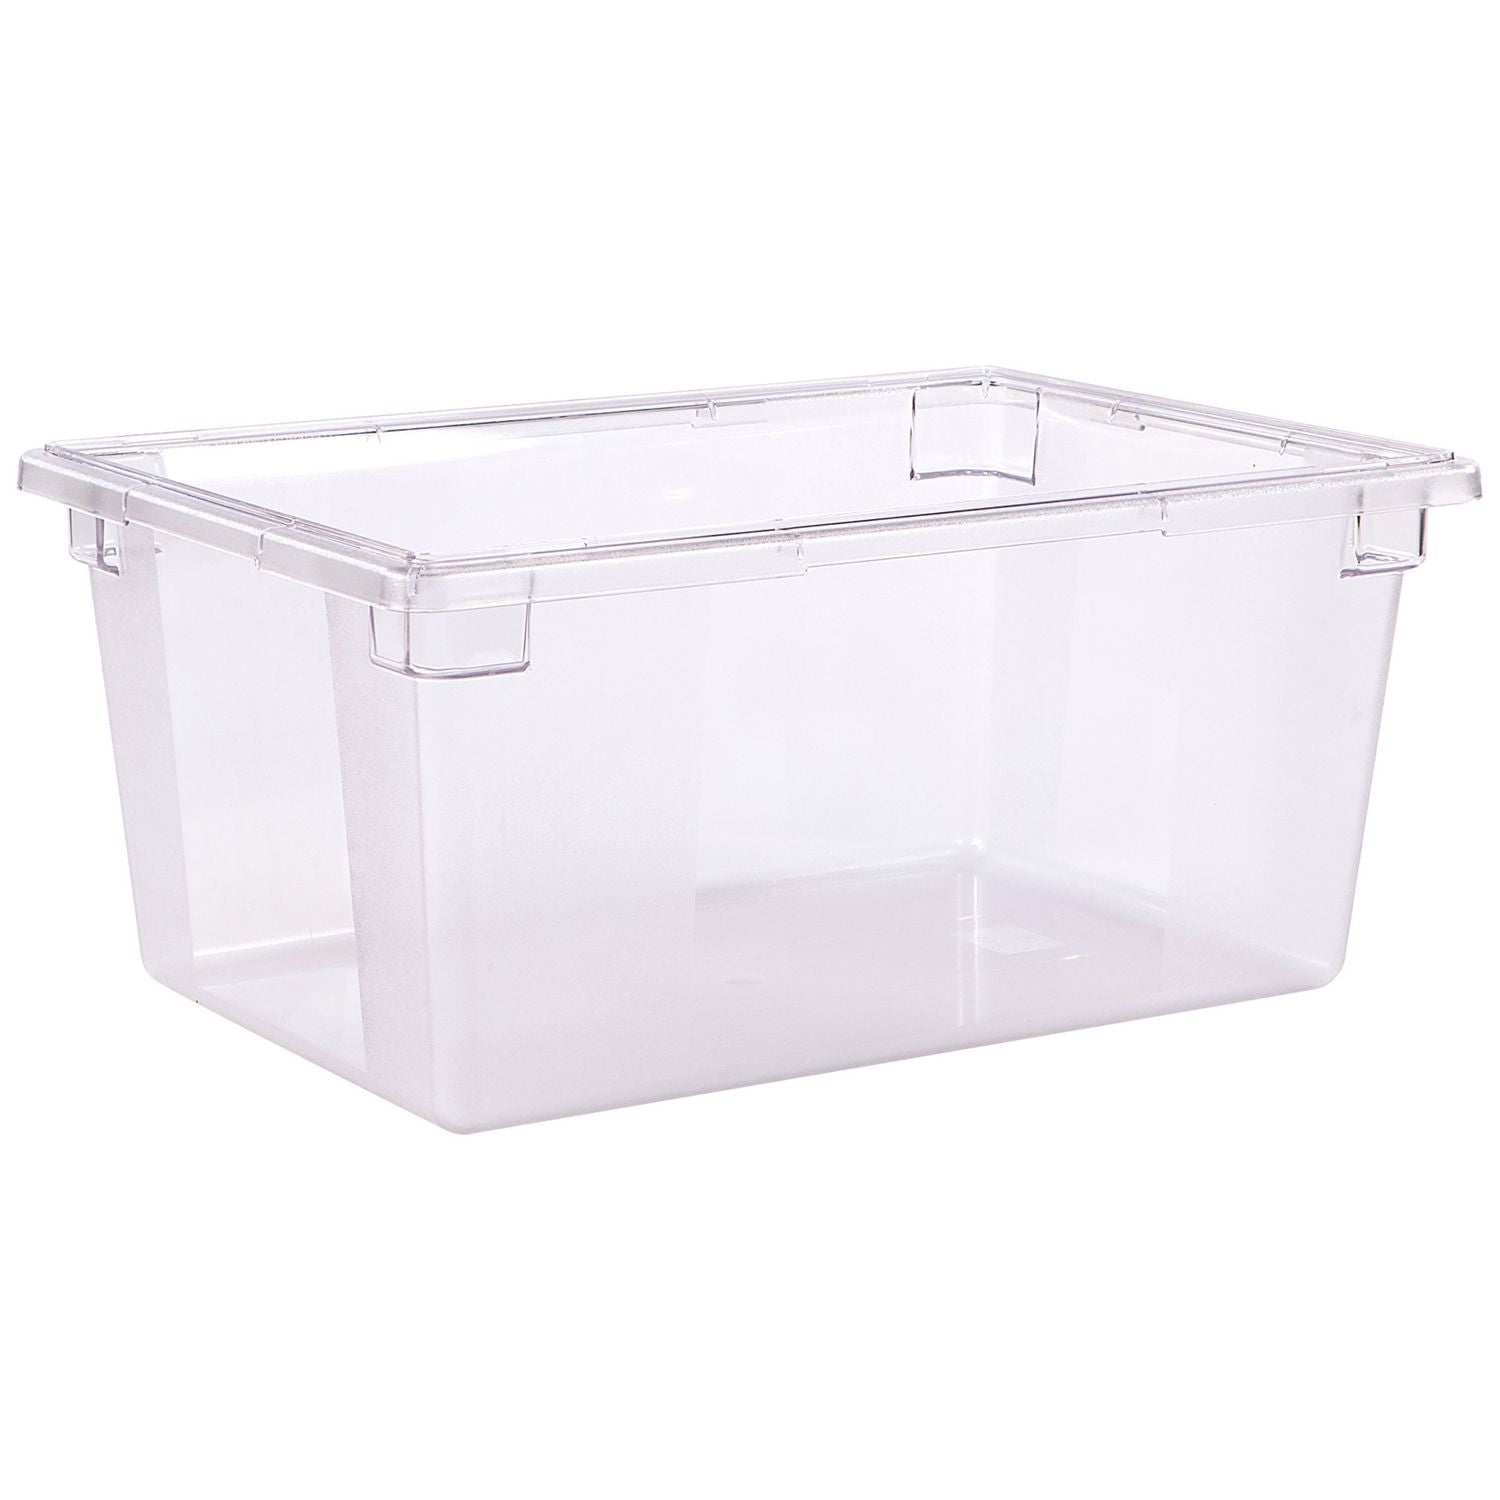 storplus-polycarbonate-food-storage-container-166-gal-18-x-26-x-12-clear-plastic_cfs1062307 - 1